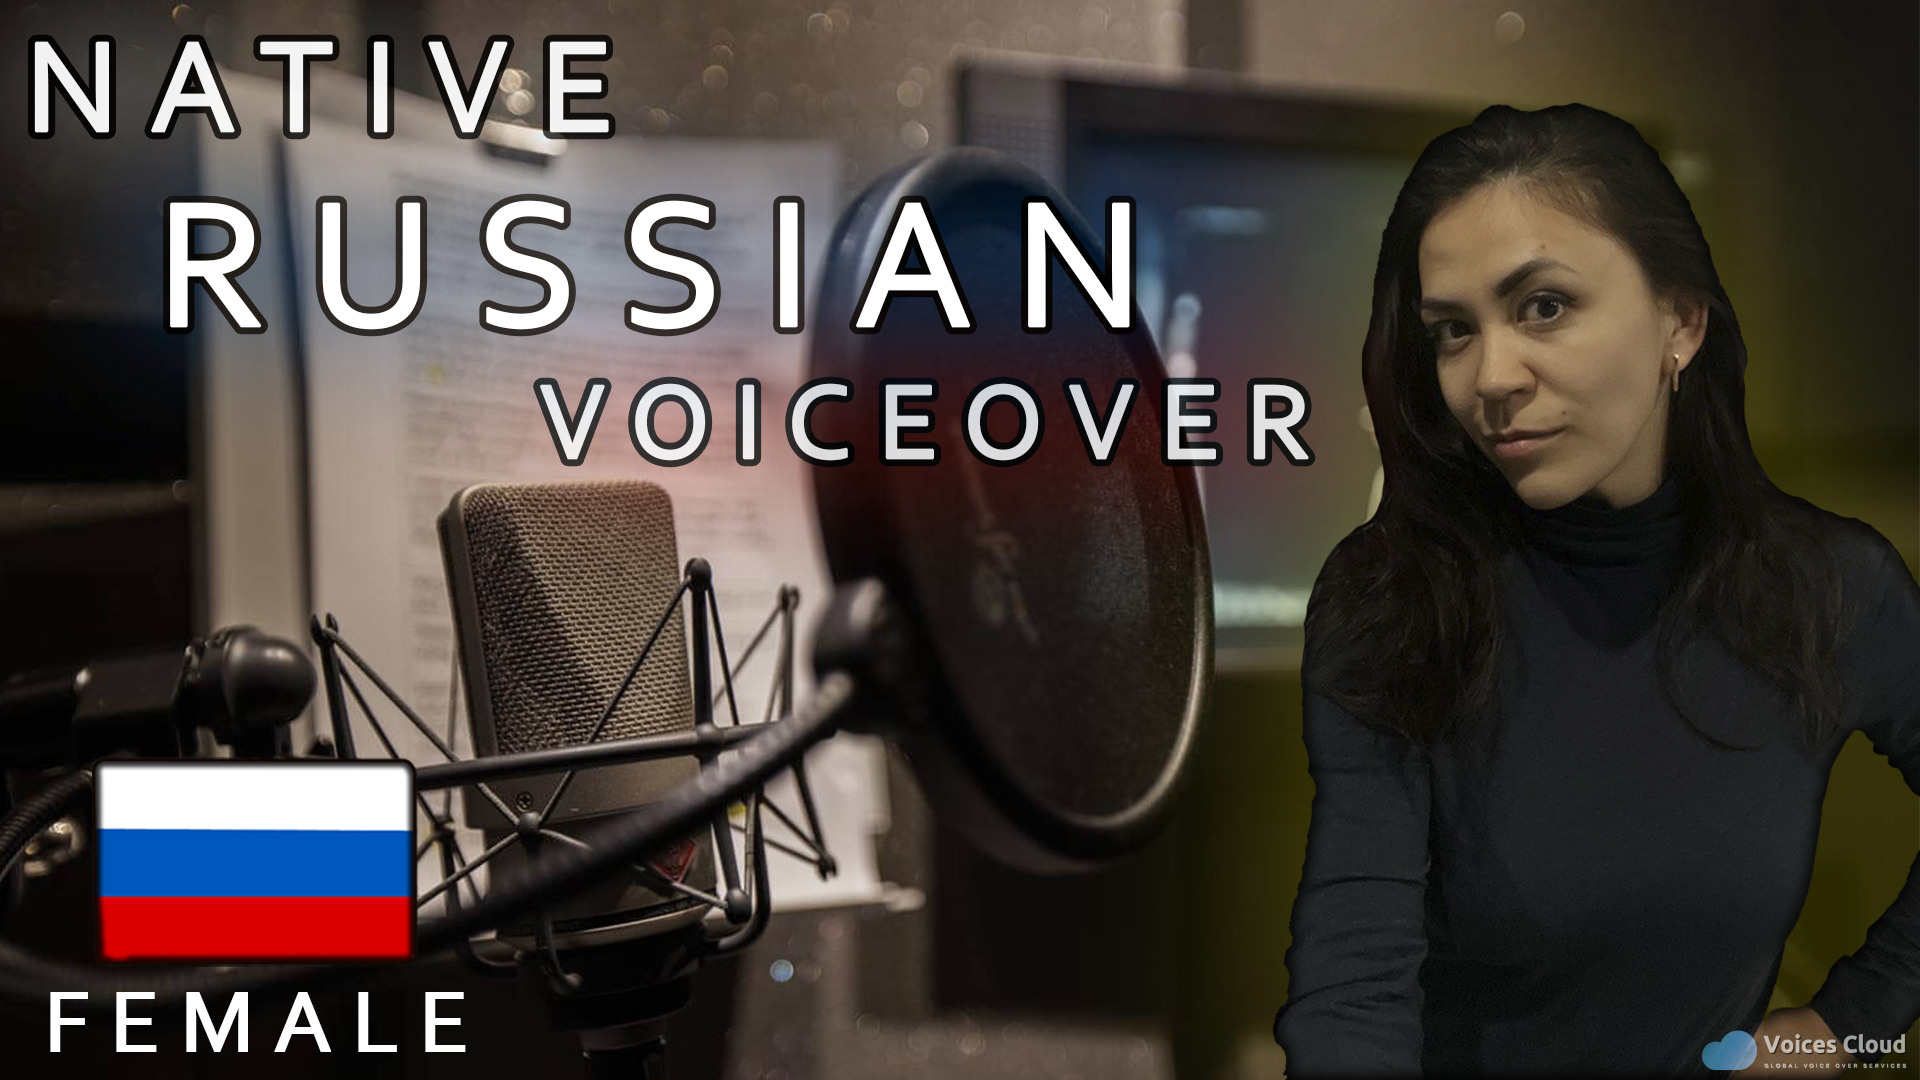 67138Native Female Russian voiceover